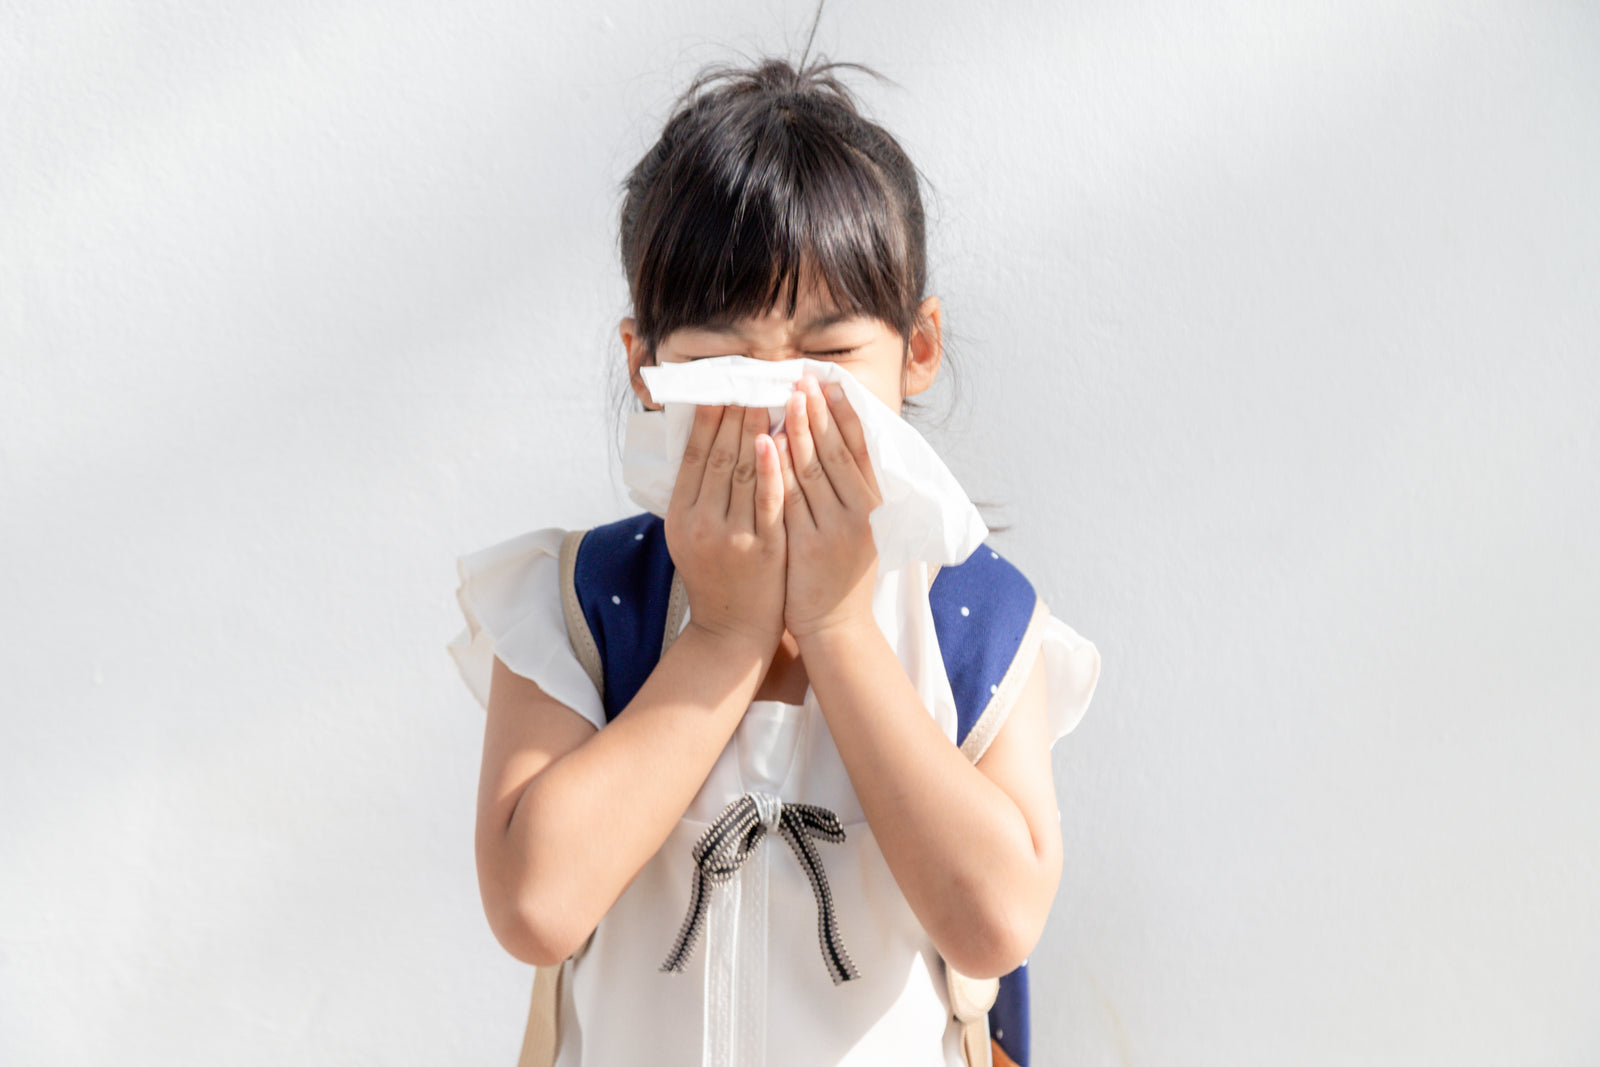 Keep School Attendance High By Avoiding Colds This Season